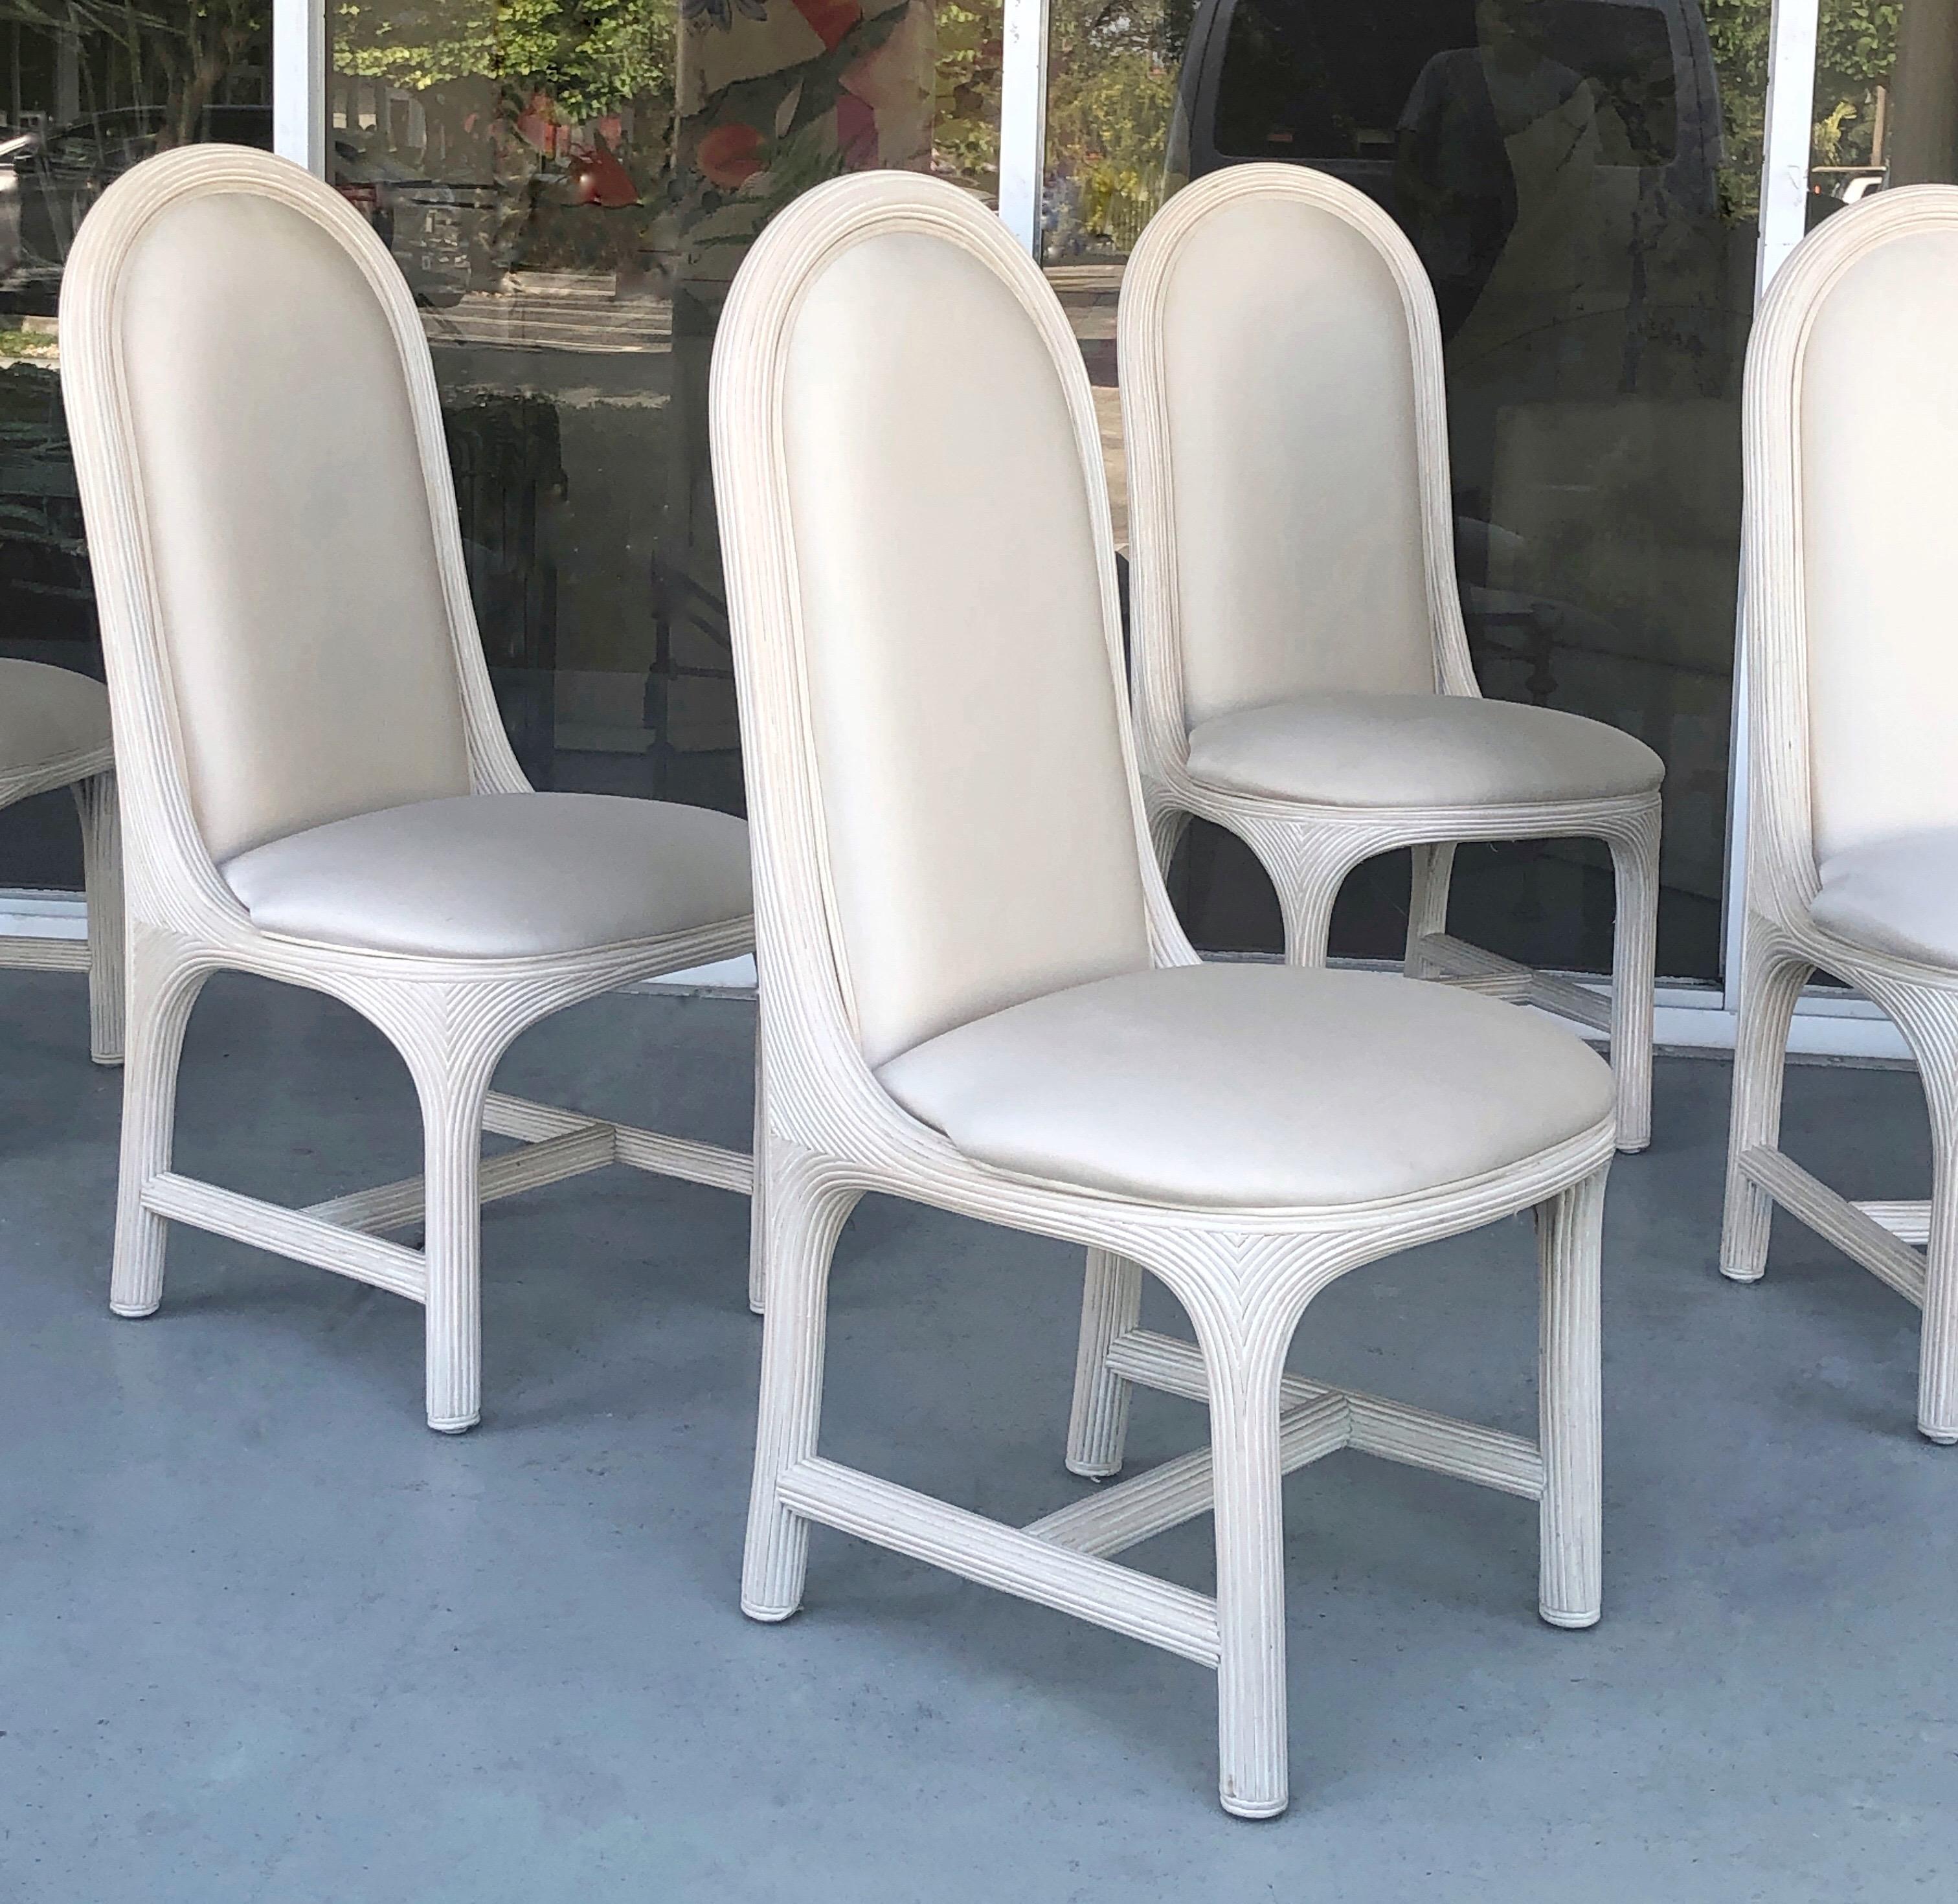 A set of elegant understated dining chairs. Bold and harmonious design. Meticulously crafted. Off-white color is not a wash nor a painted finish, somehow in between.